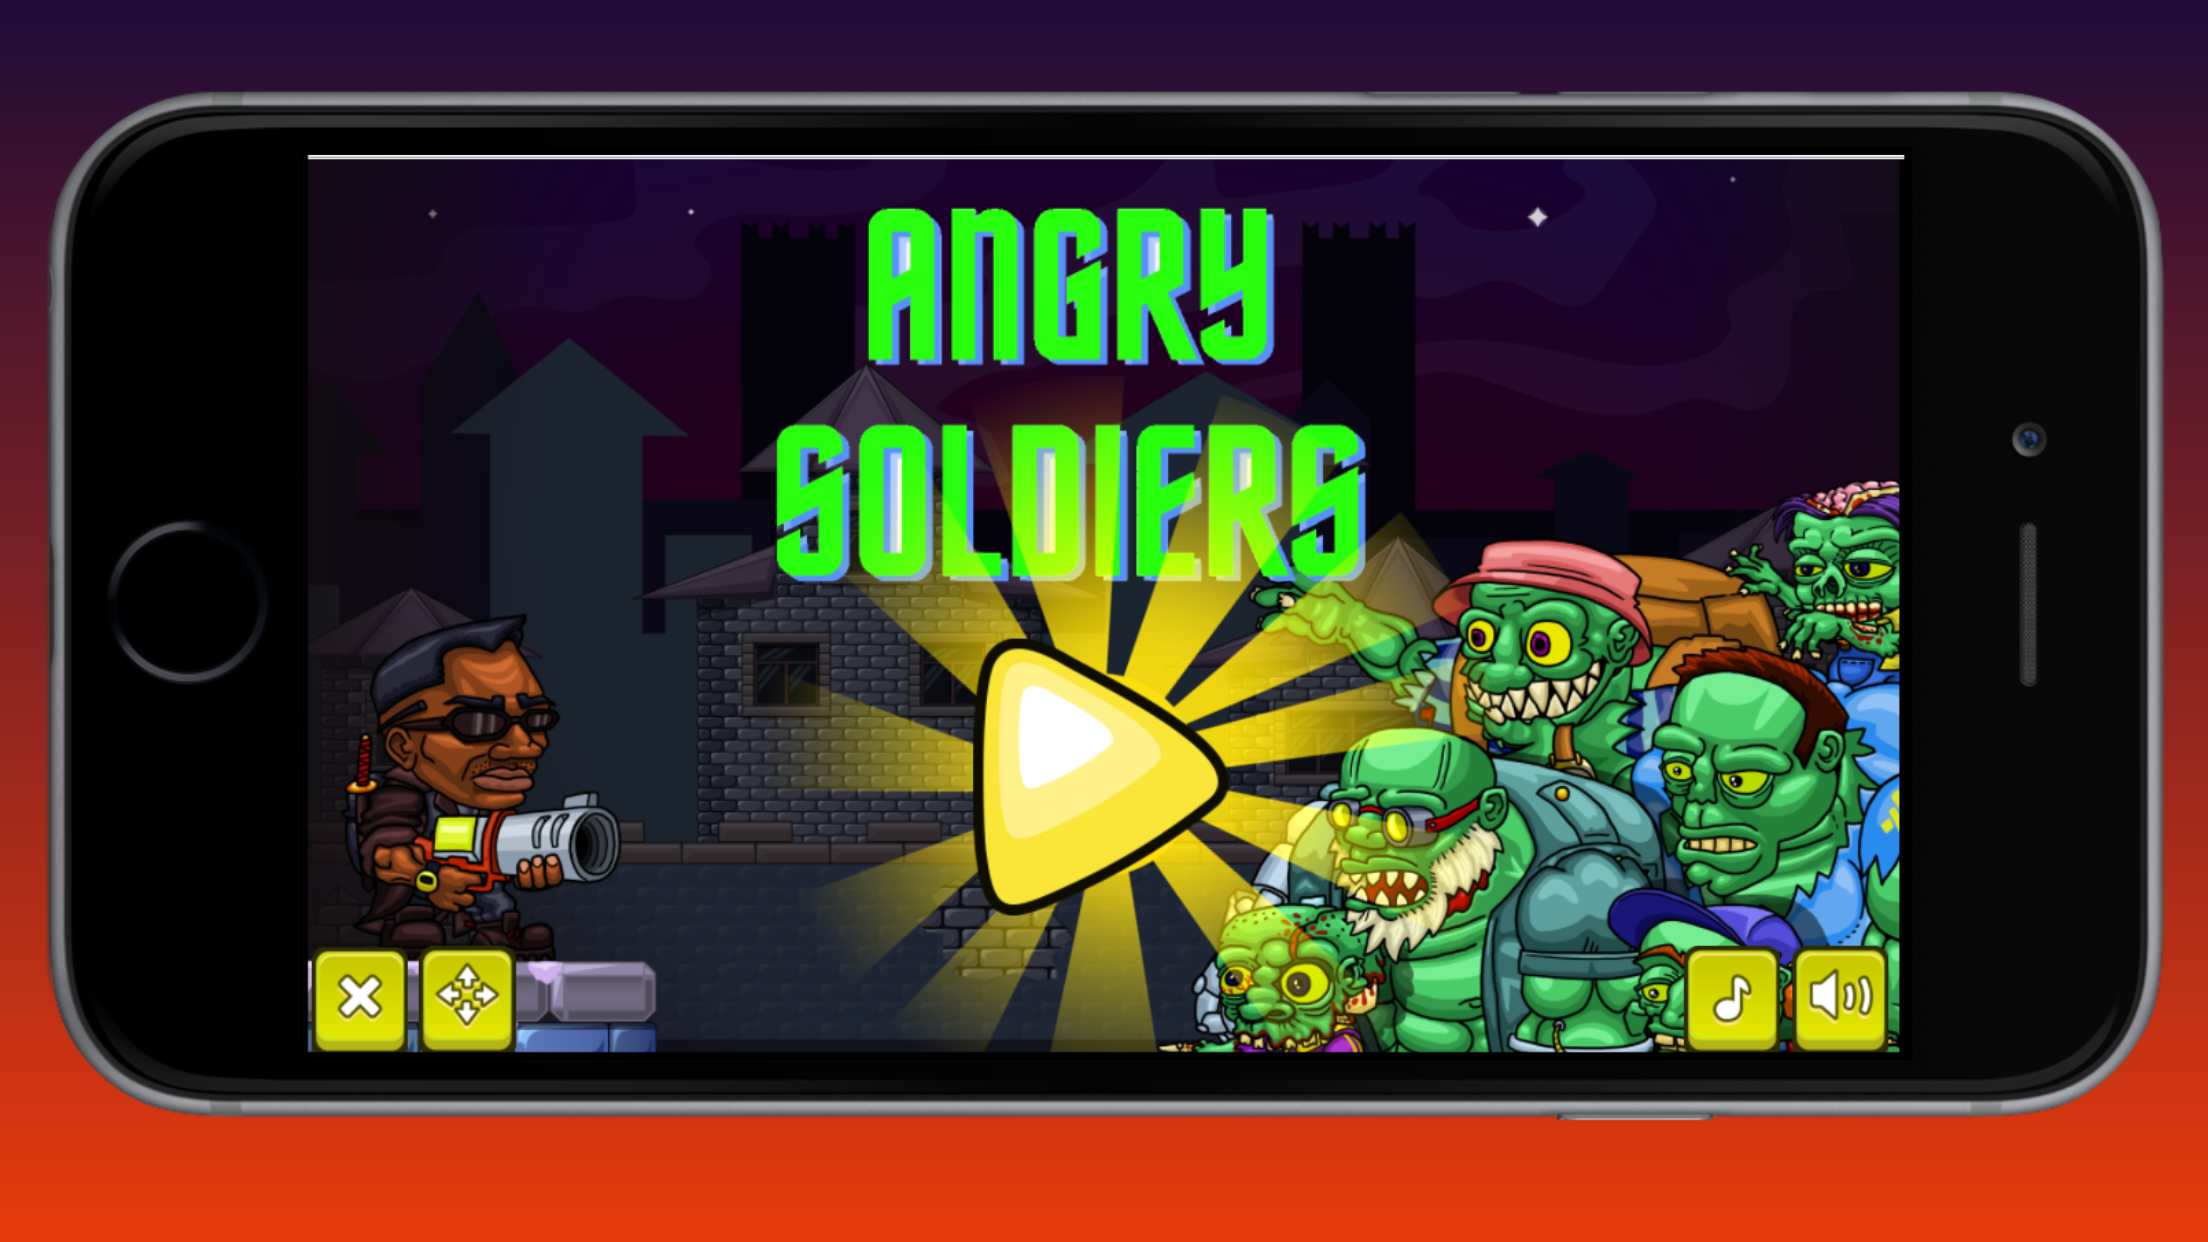 Screenshot 1 of Angry Soldier 1.0.0